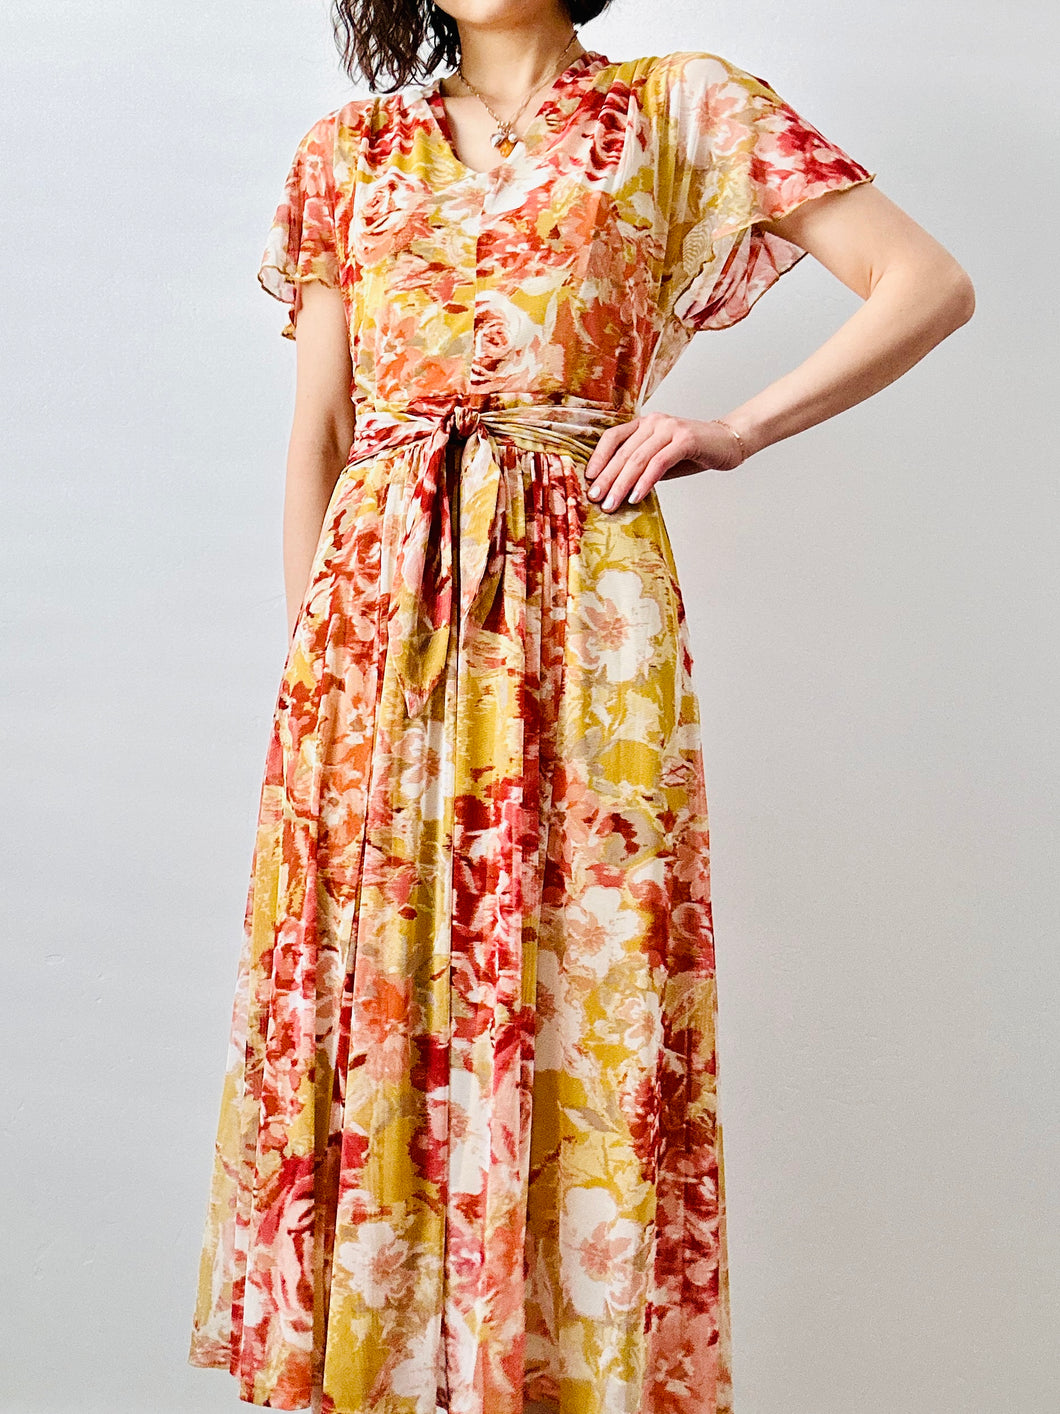 Vintage yellow abstract floral dress